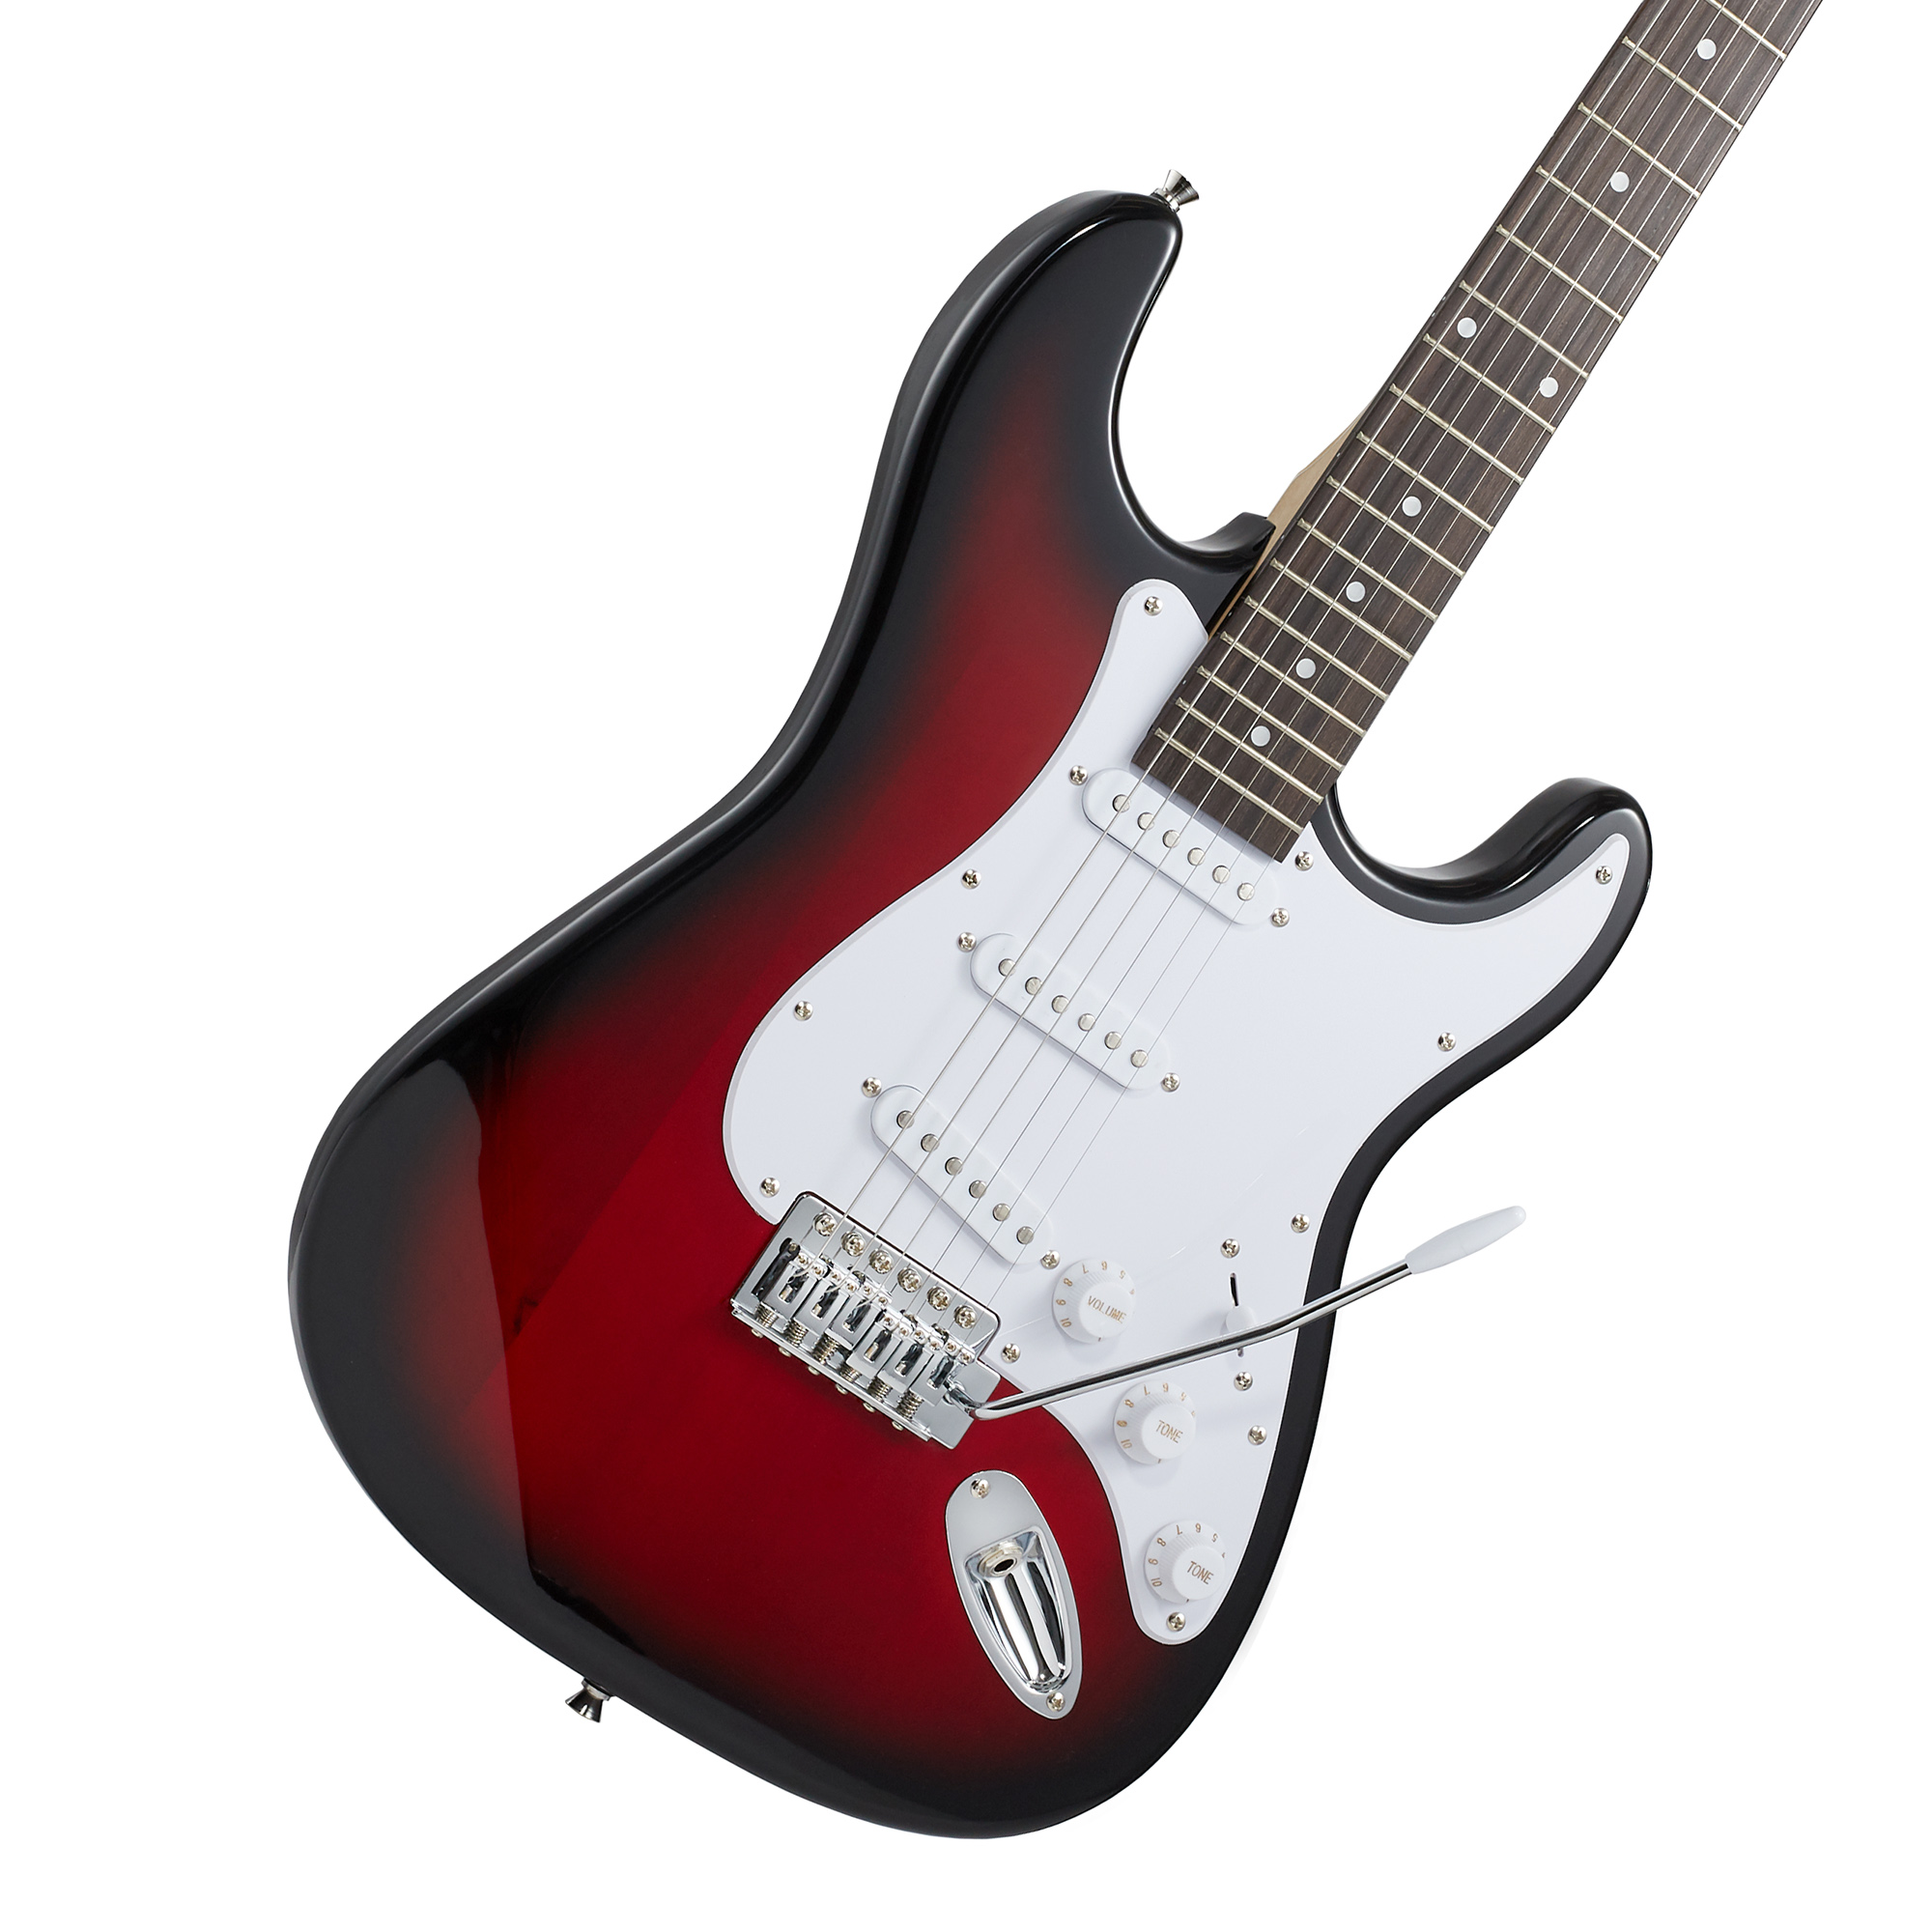 Ashthorpe 39-Inch Electric Guitar with S-S-S Pickups and Tremolo Bar - Red/White - image 2 of 7